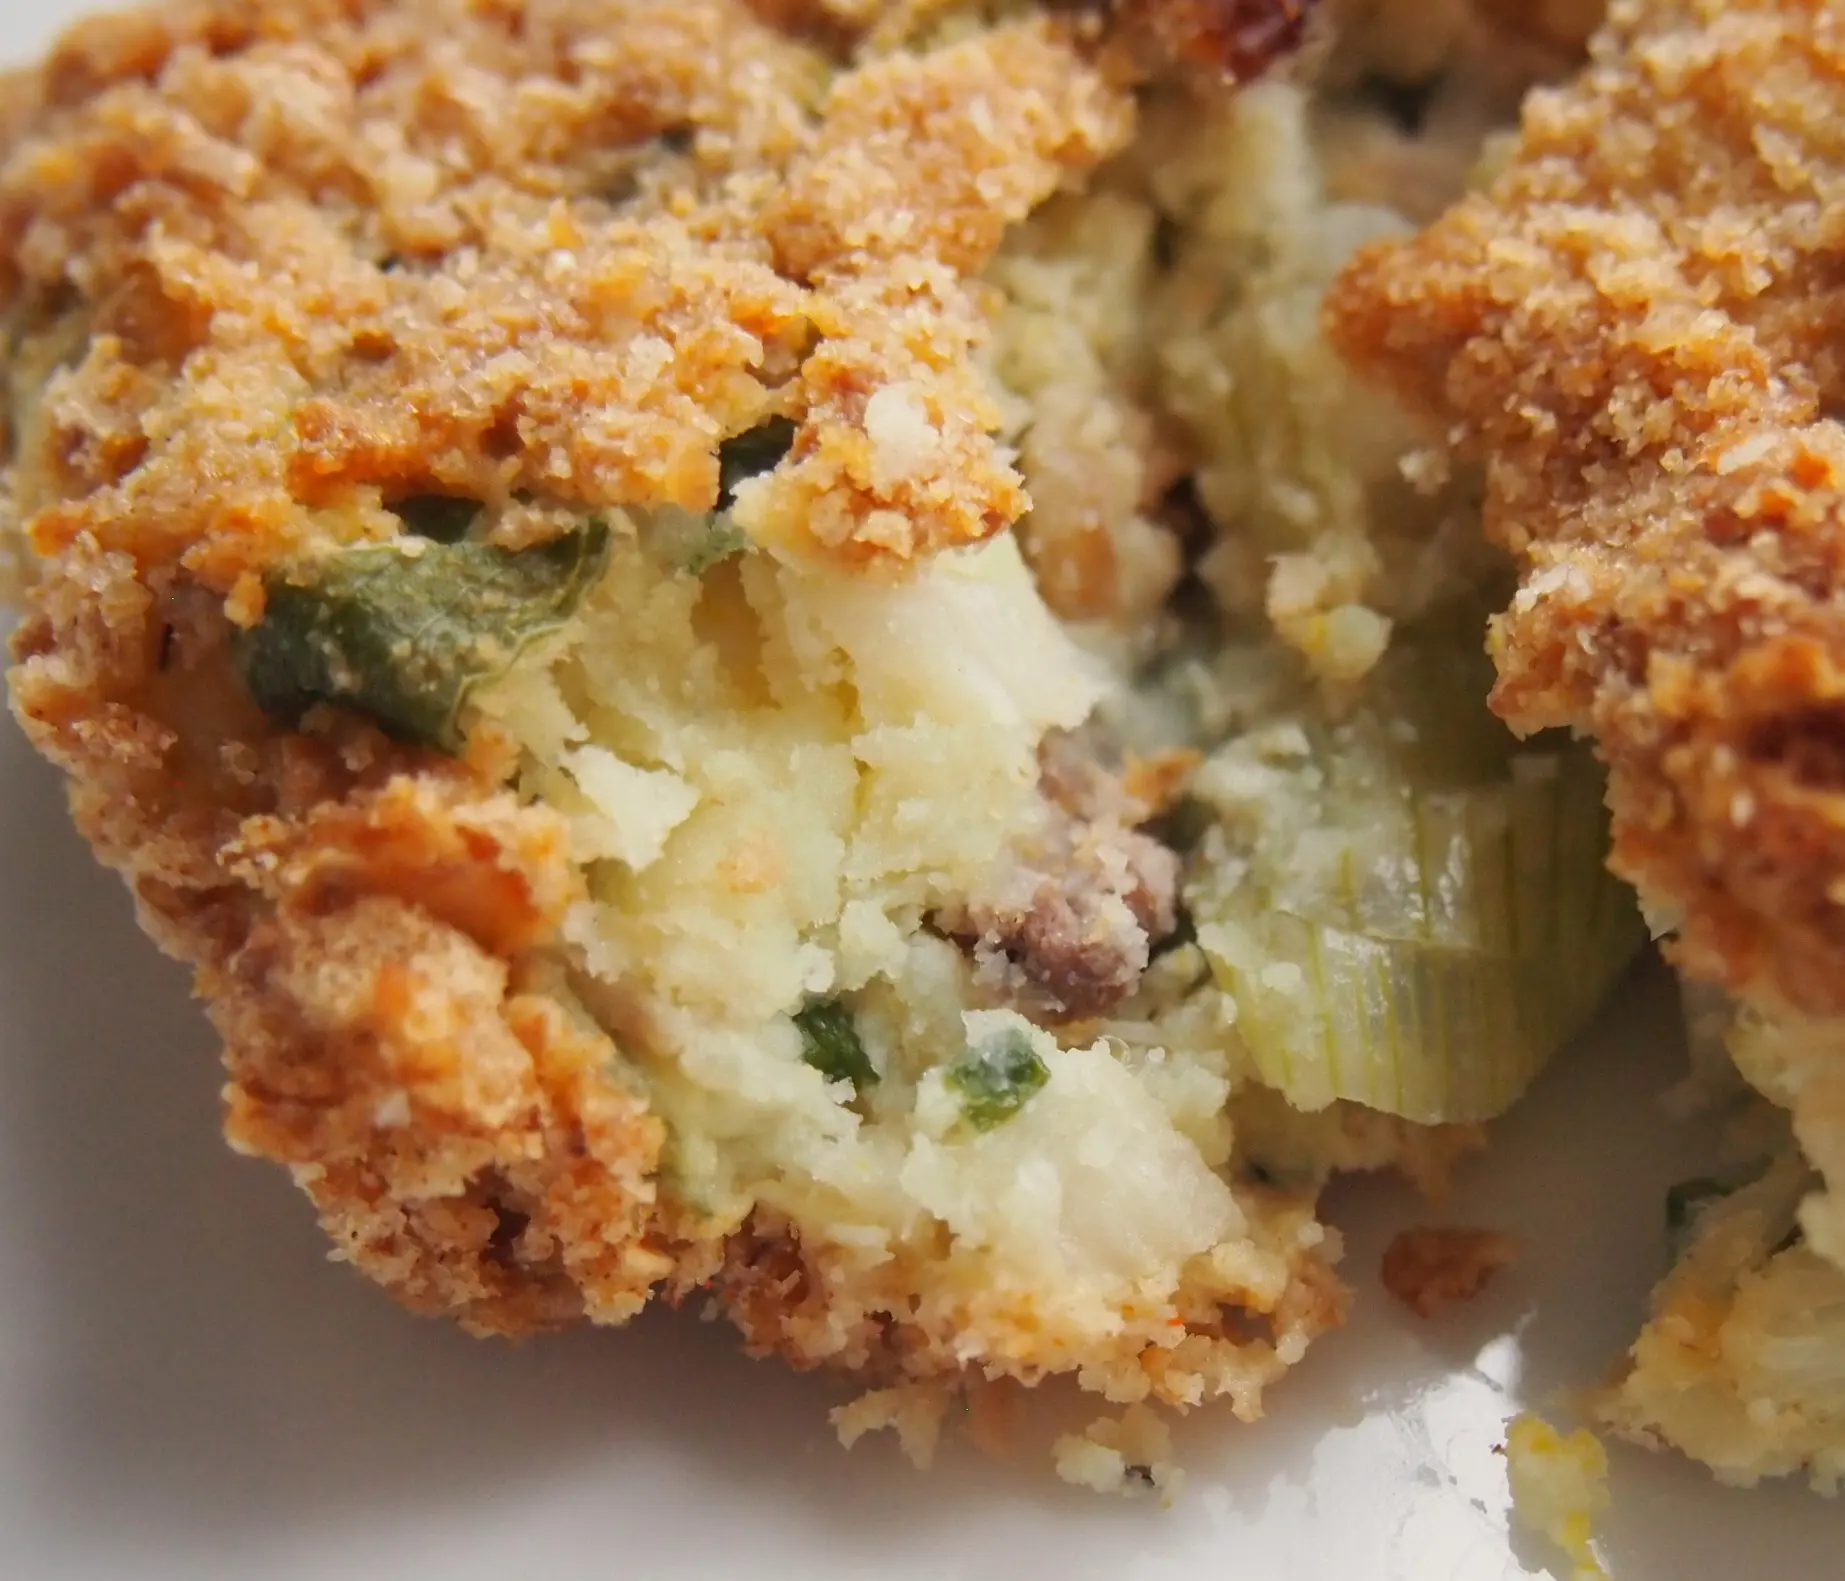 hairy bikers smoked haddock fishcakes - How do you know when fishcakes are cooked